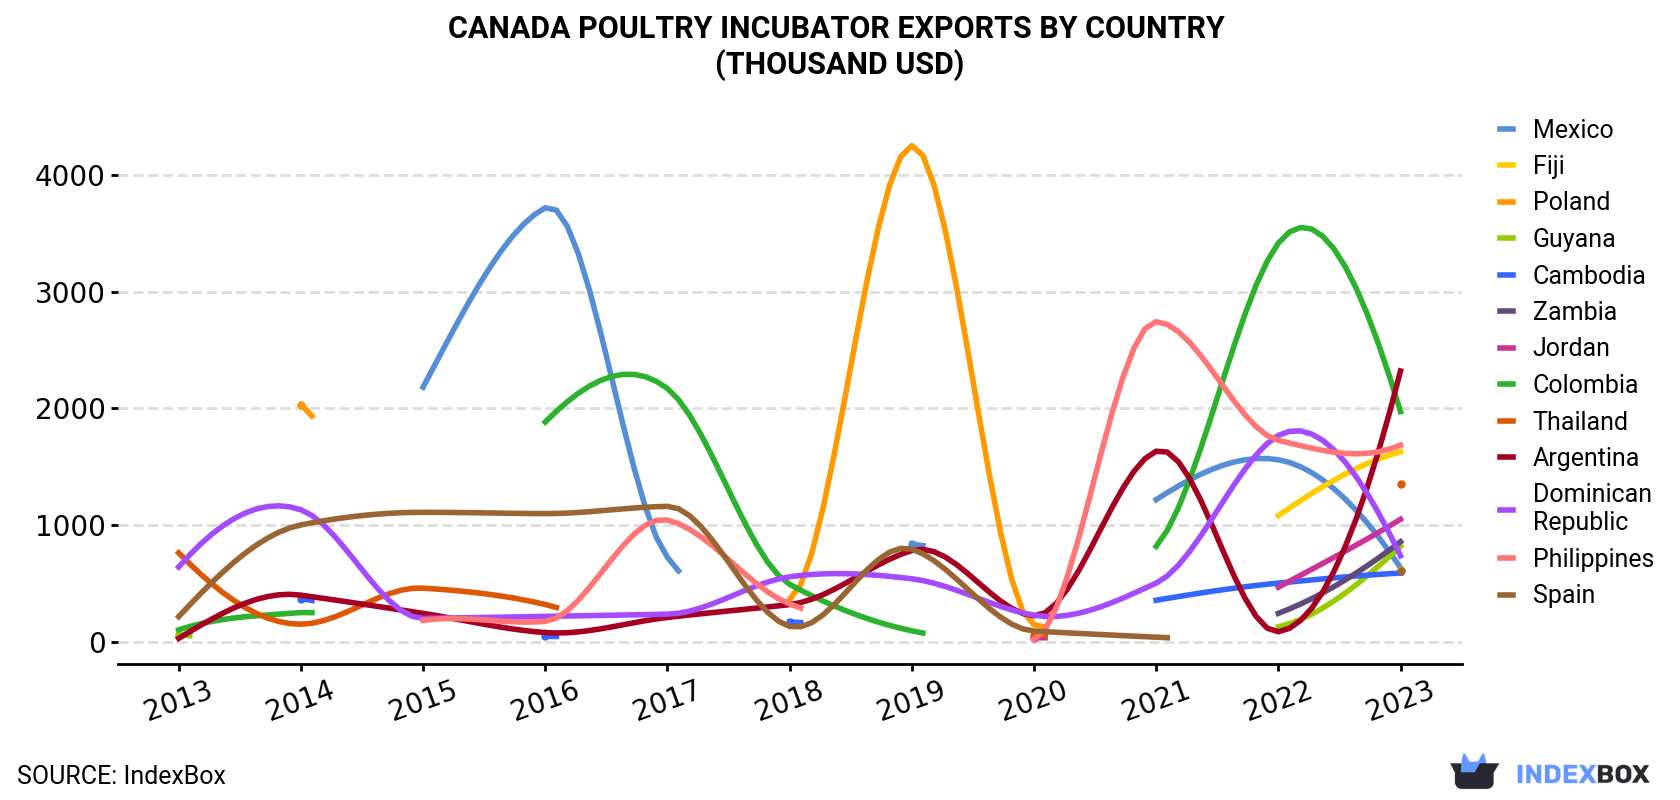 Canada Poultry Incubator Exports By Country (Thousand USD)